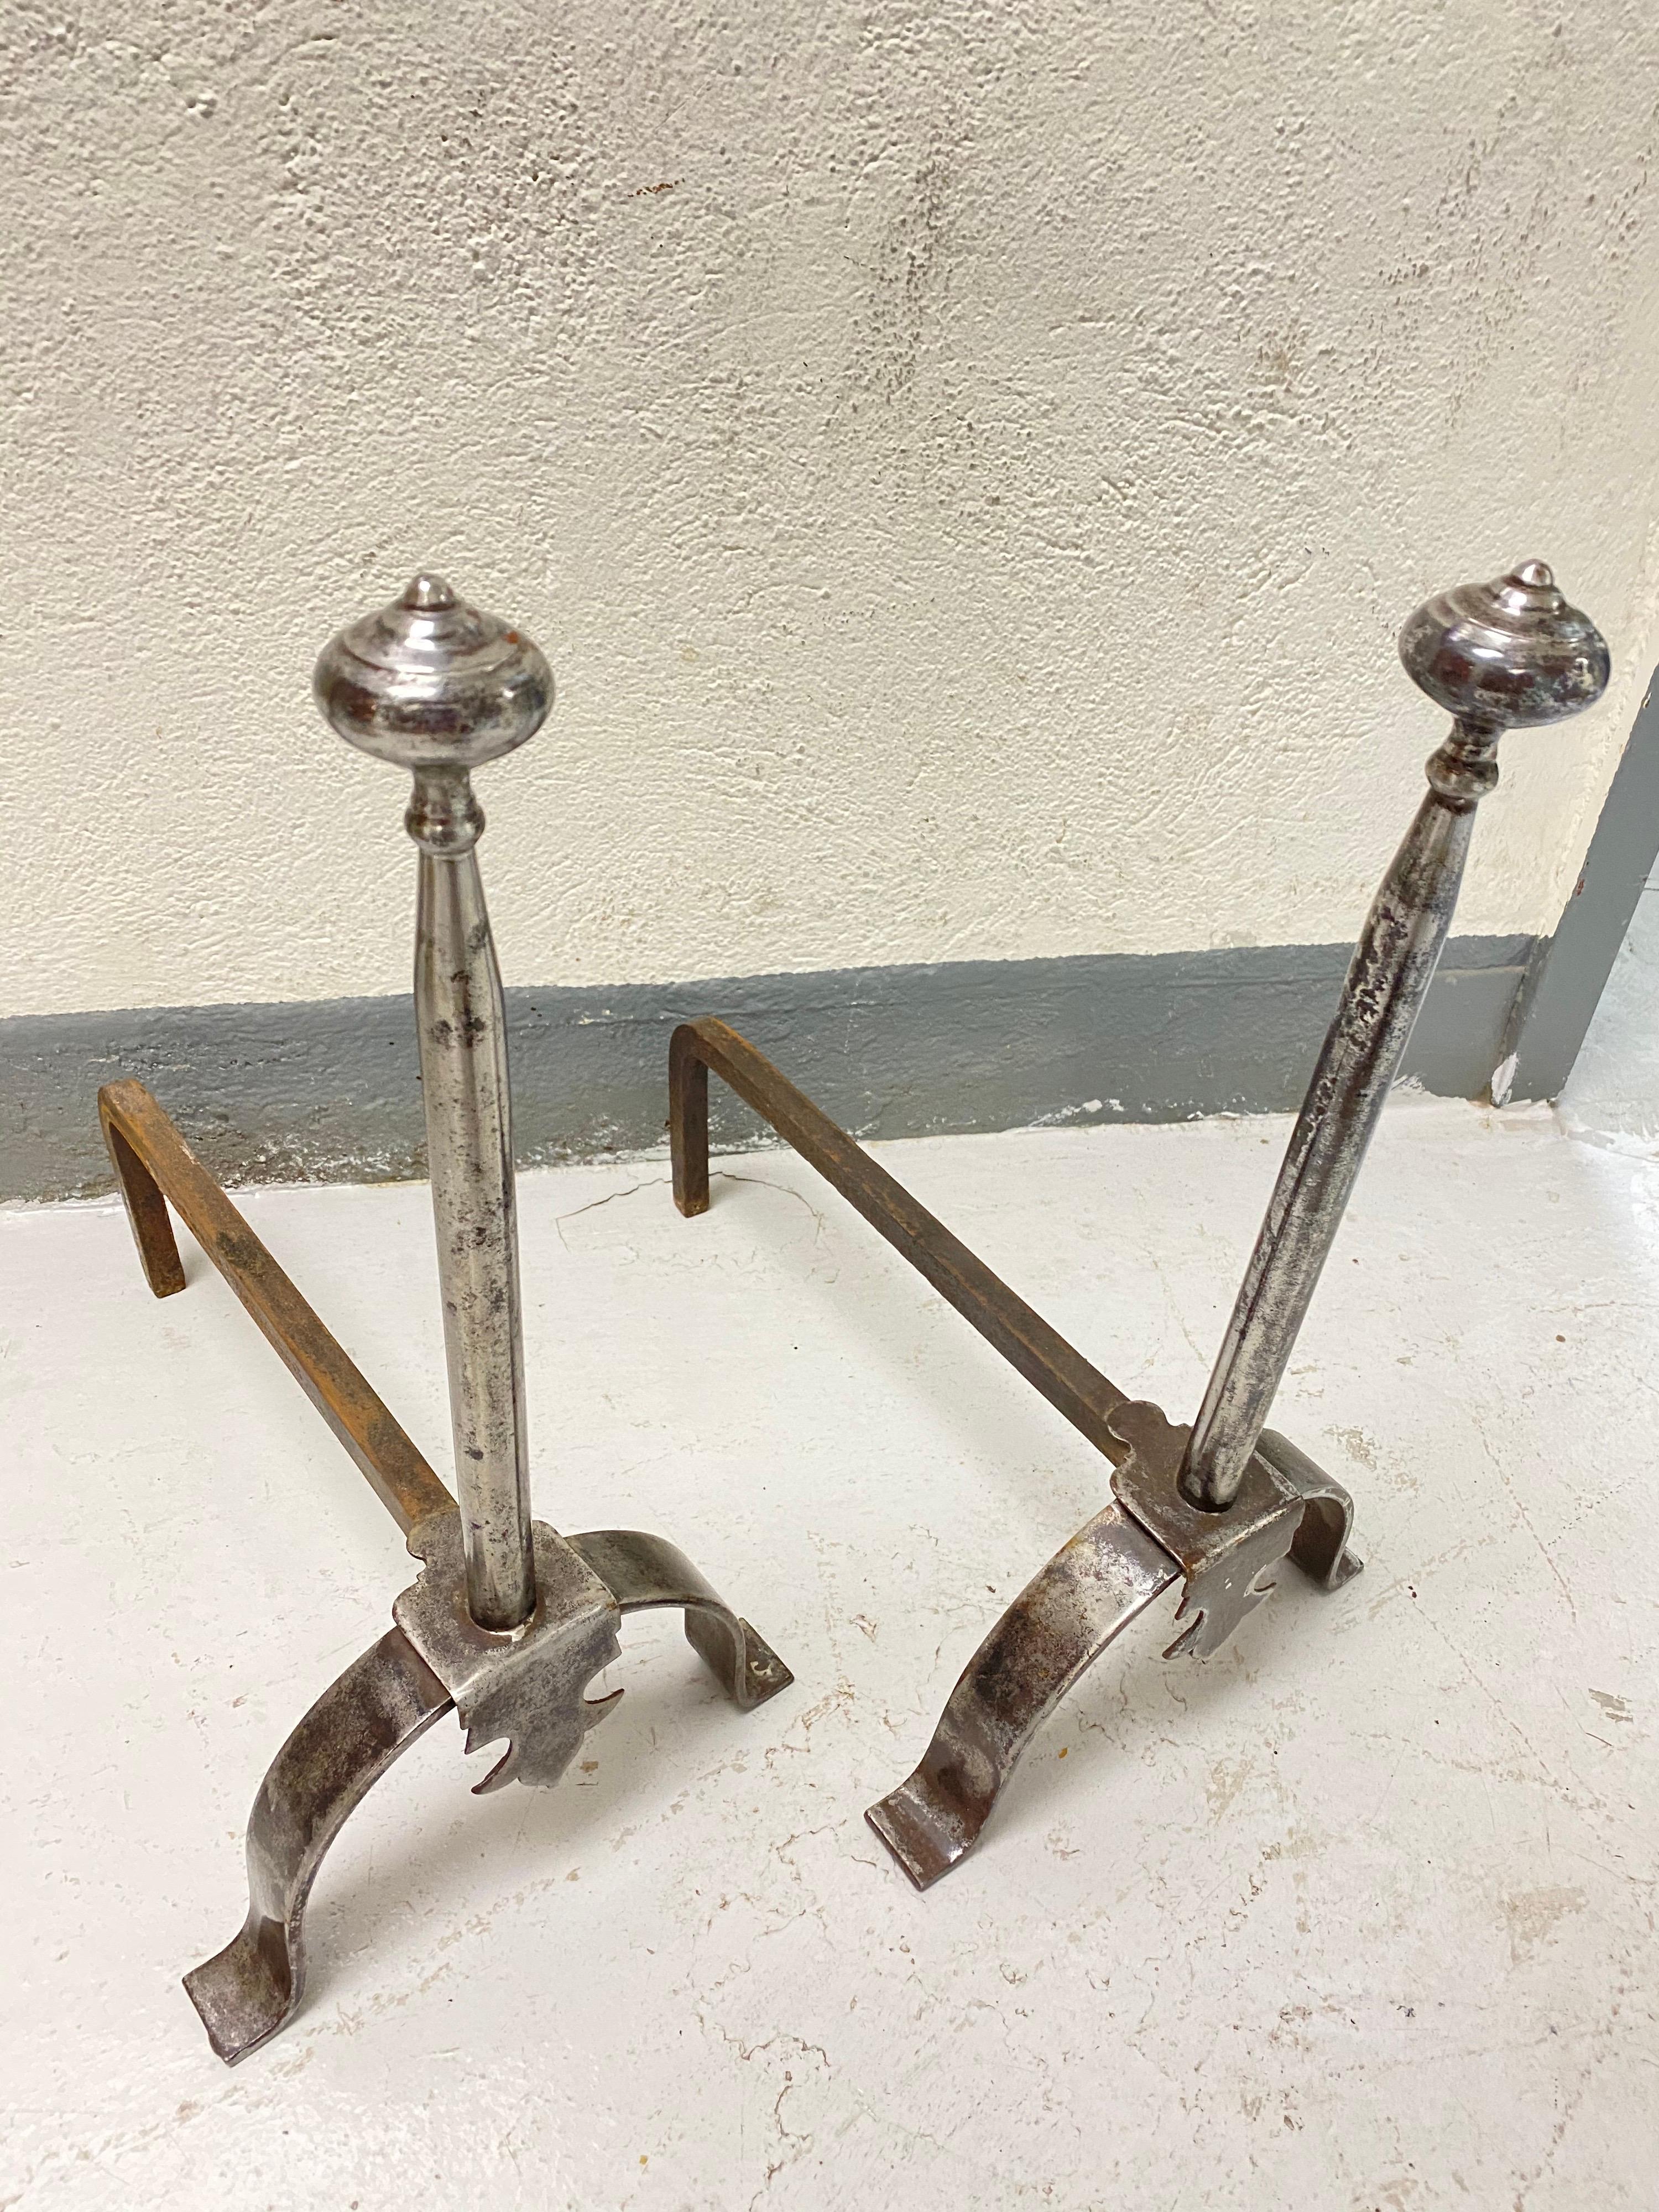 A pair of late 19th century steel andirons

Steel surfaces patinated and polished to a good even finish.